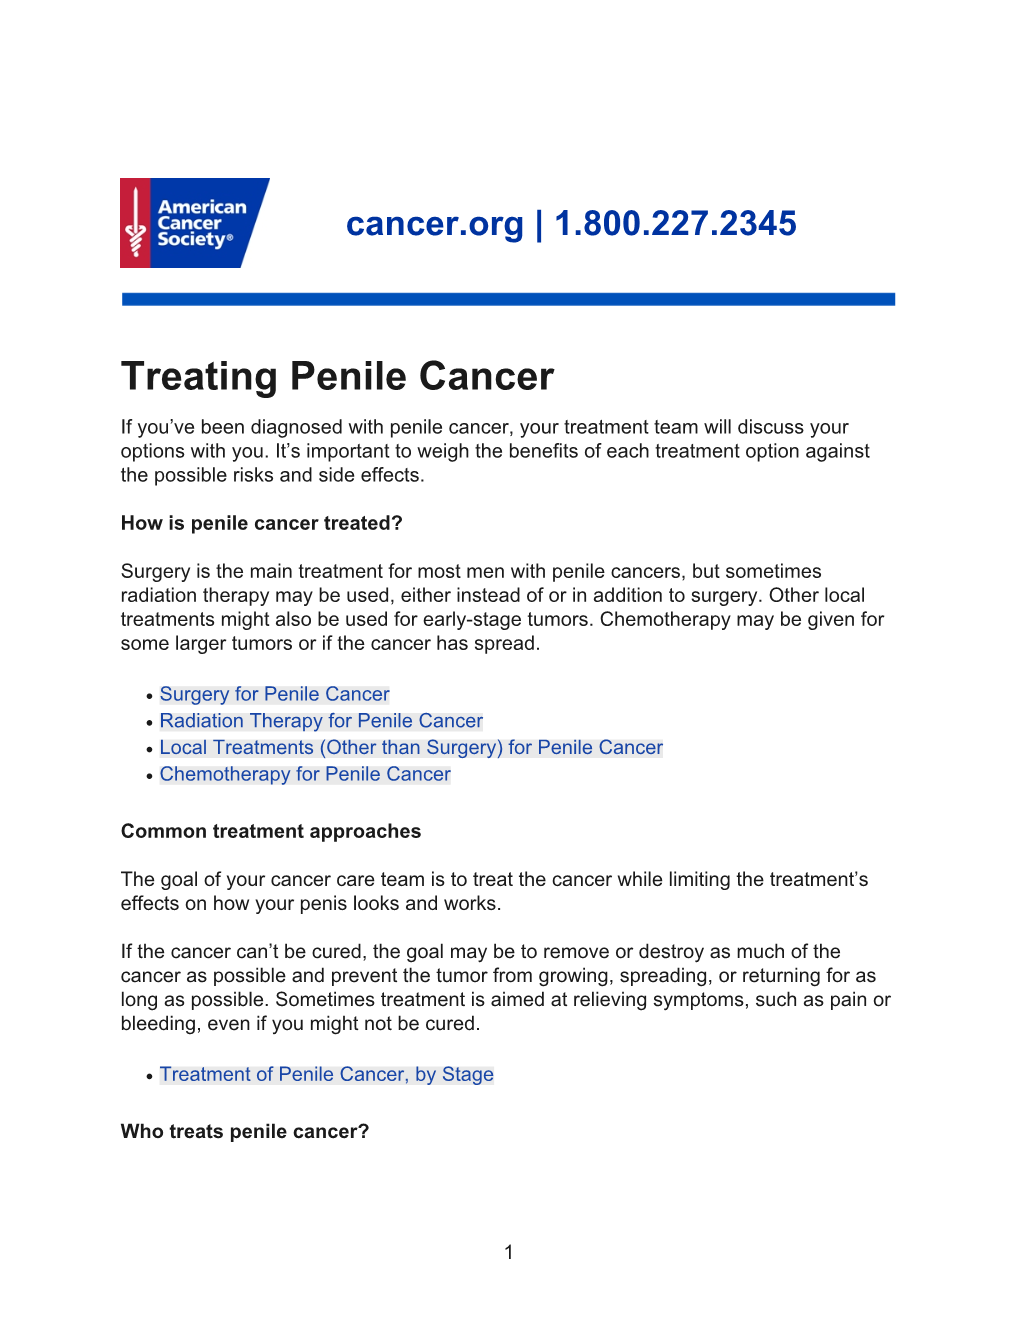 Treating Penile Cancer If You’Ve Been Diagnosed with Penile Cancer, Your Treatment Team Will Discuss Your Options with You